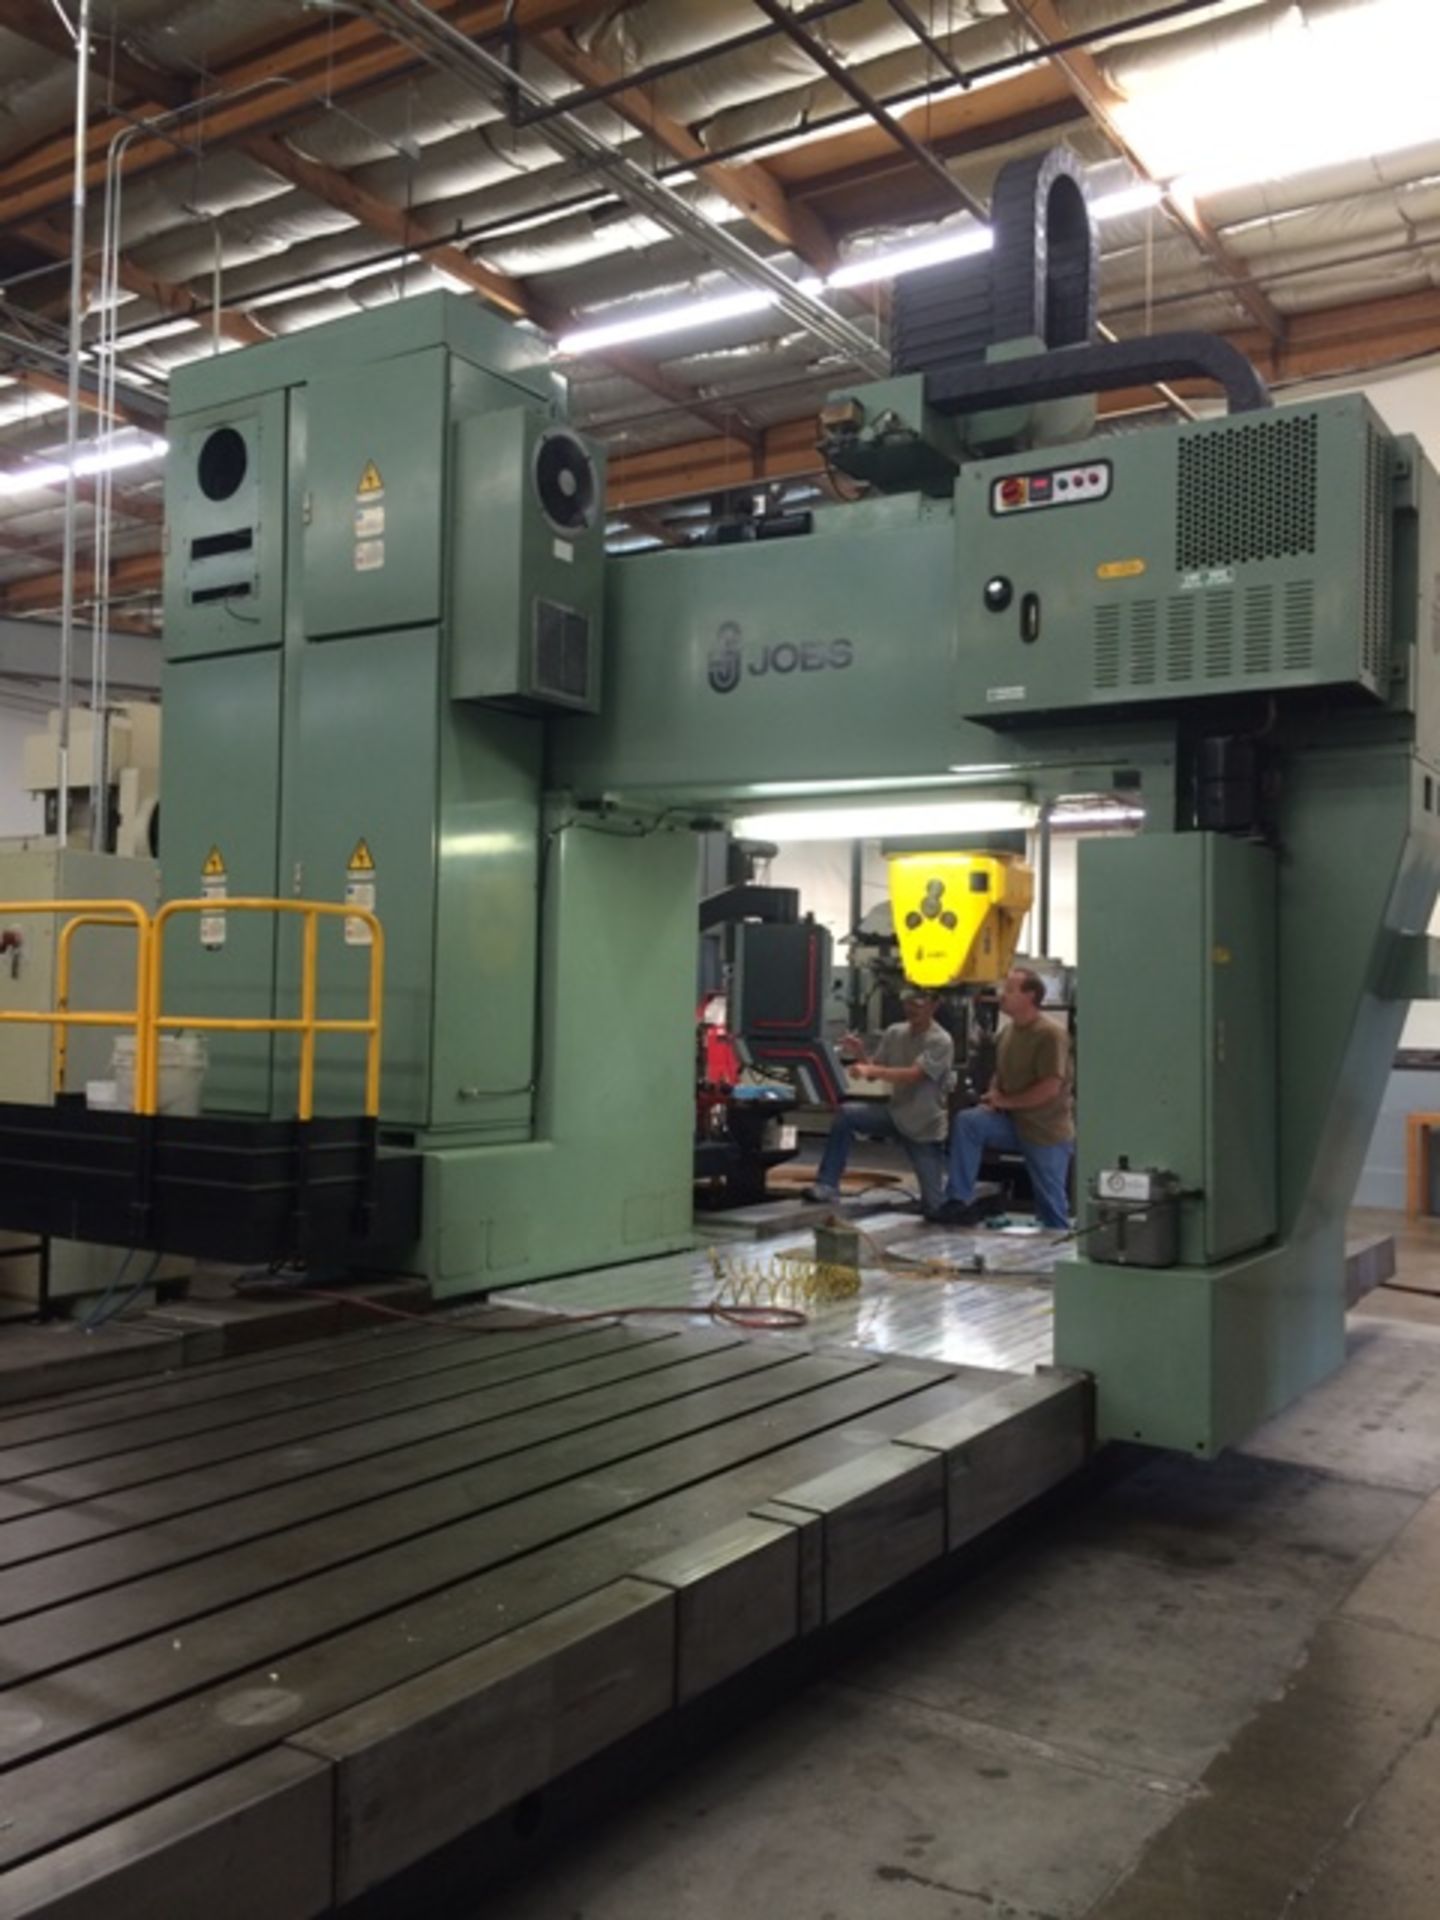 Jobs Jomach 23 5-Axis CNC Gantry-Style Machining Center, Fidia M-2 Control, 1992 Located in Brea, CA - Image 4 of 6